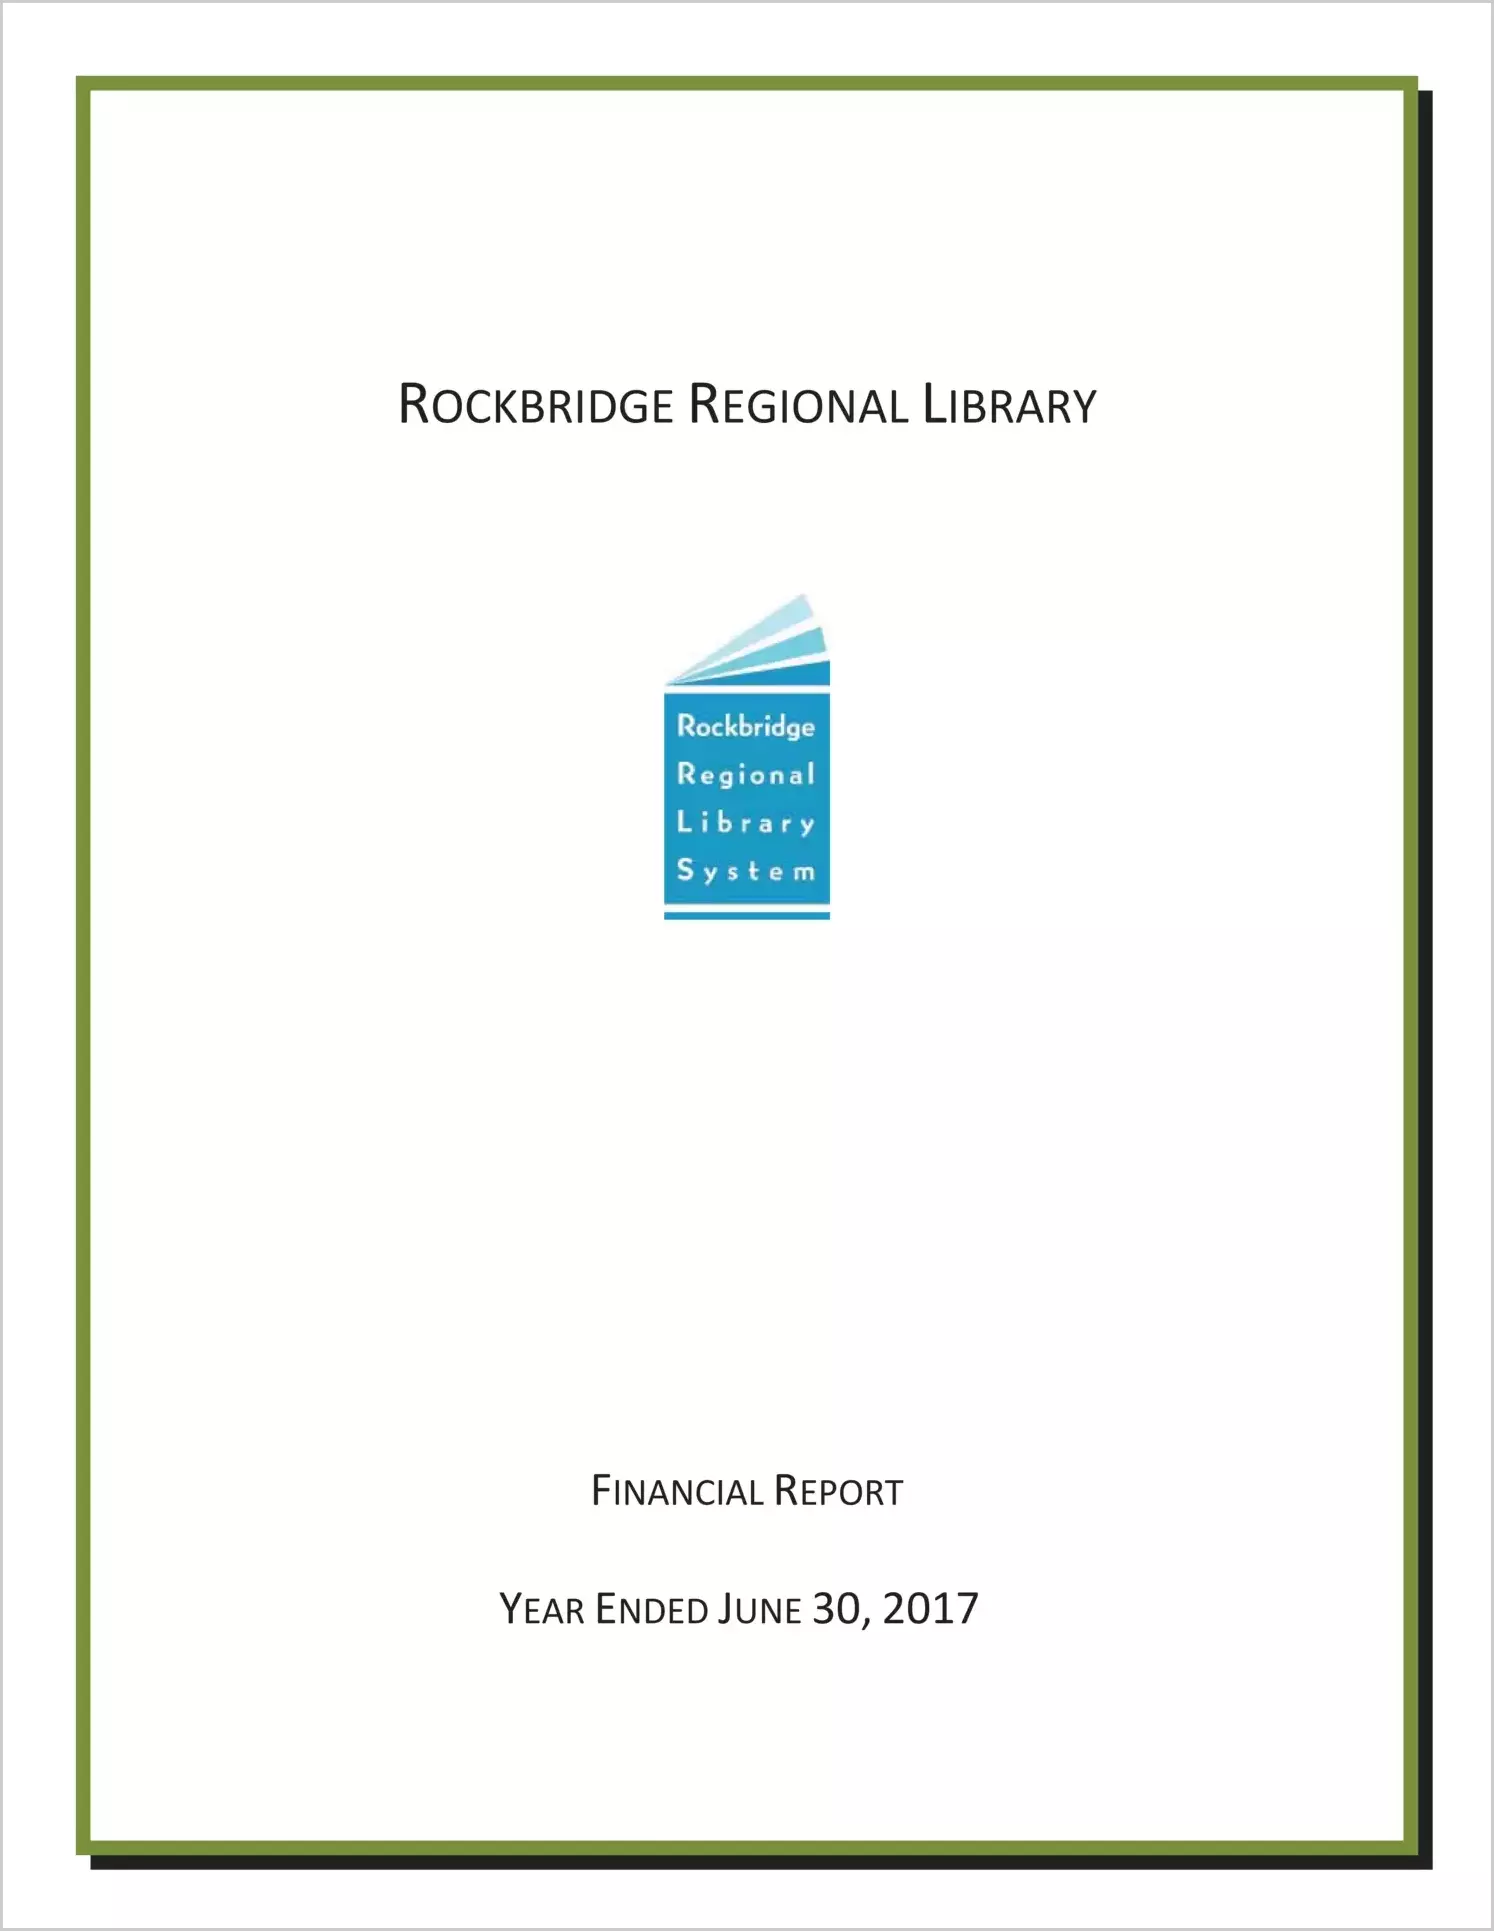 2017 ABC/Other Annual Financial Report  for Rockbridge Regional Library